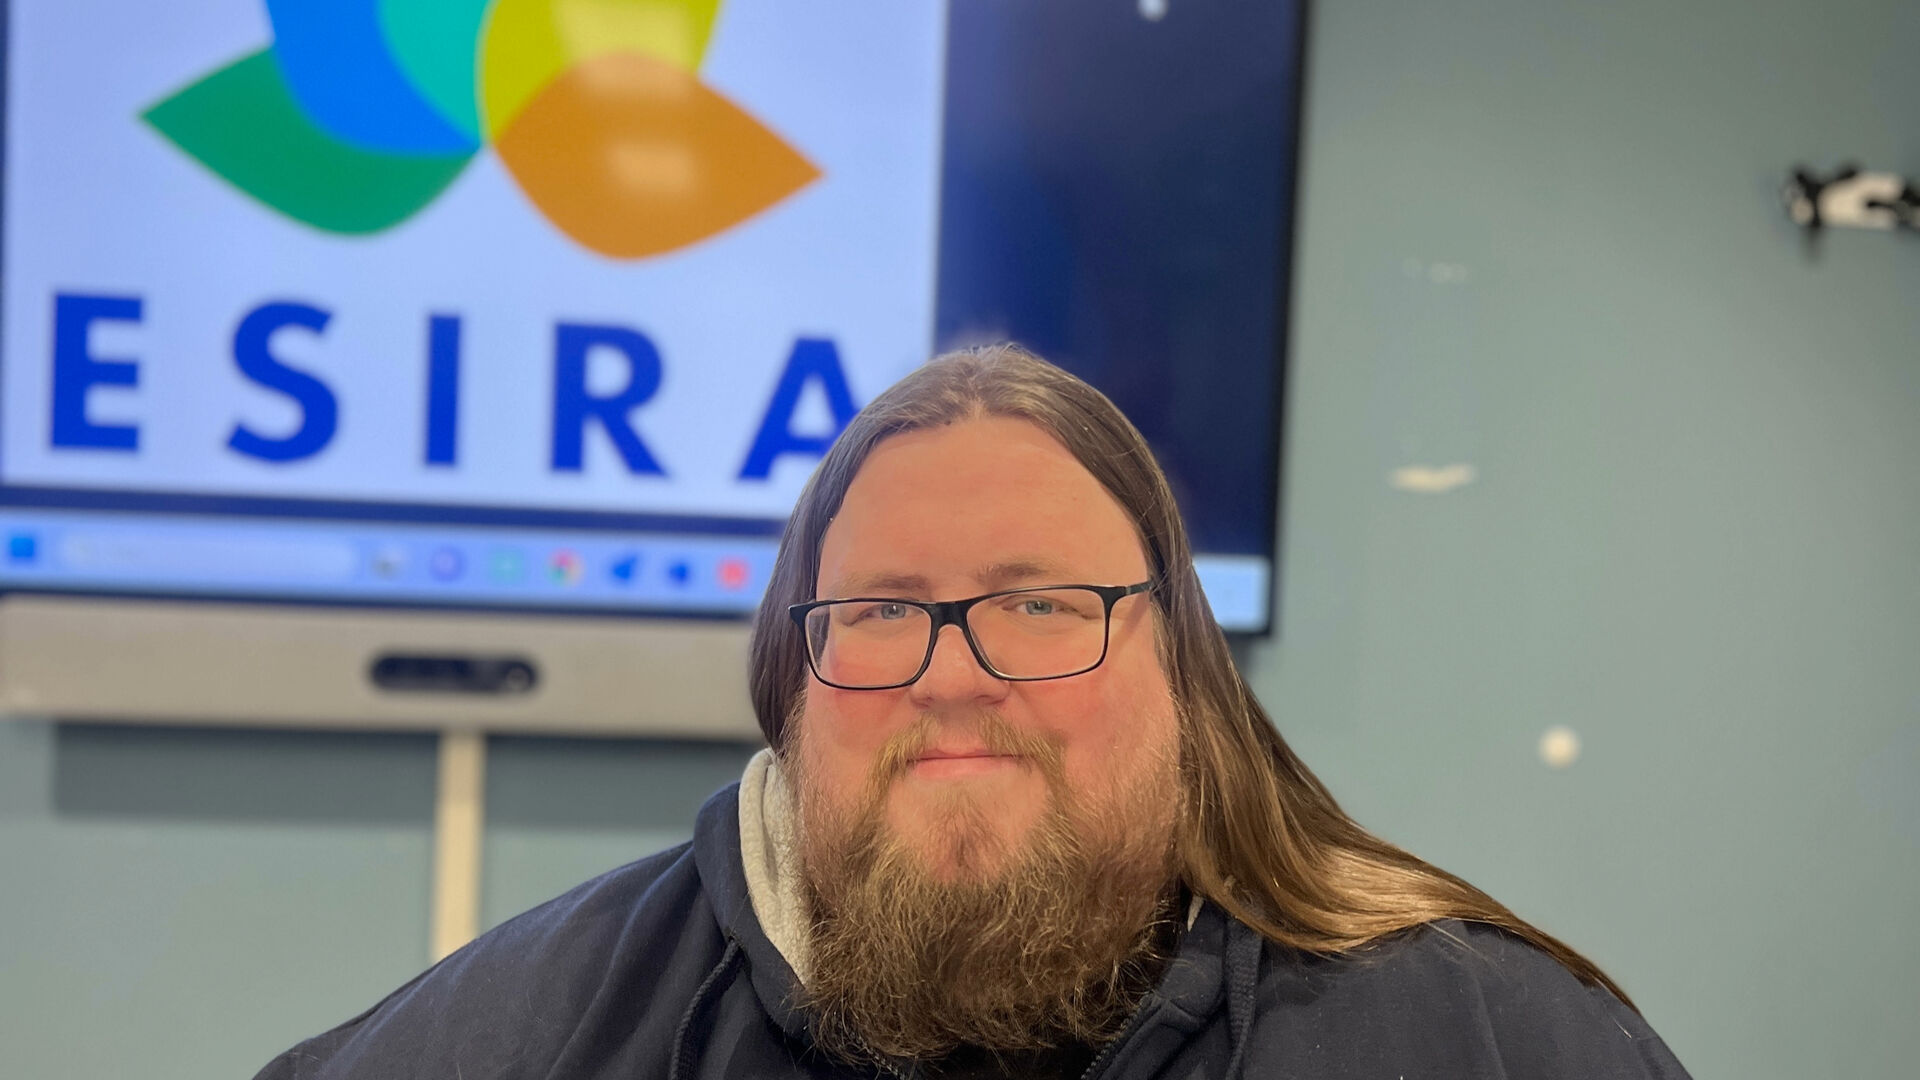 man with long hair and beard, smiling in front of colourful logo wih abbreviation ESIRA